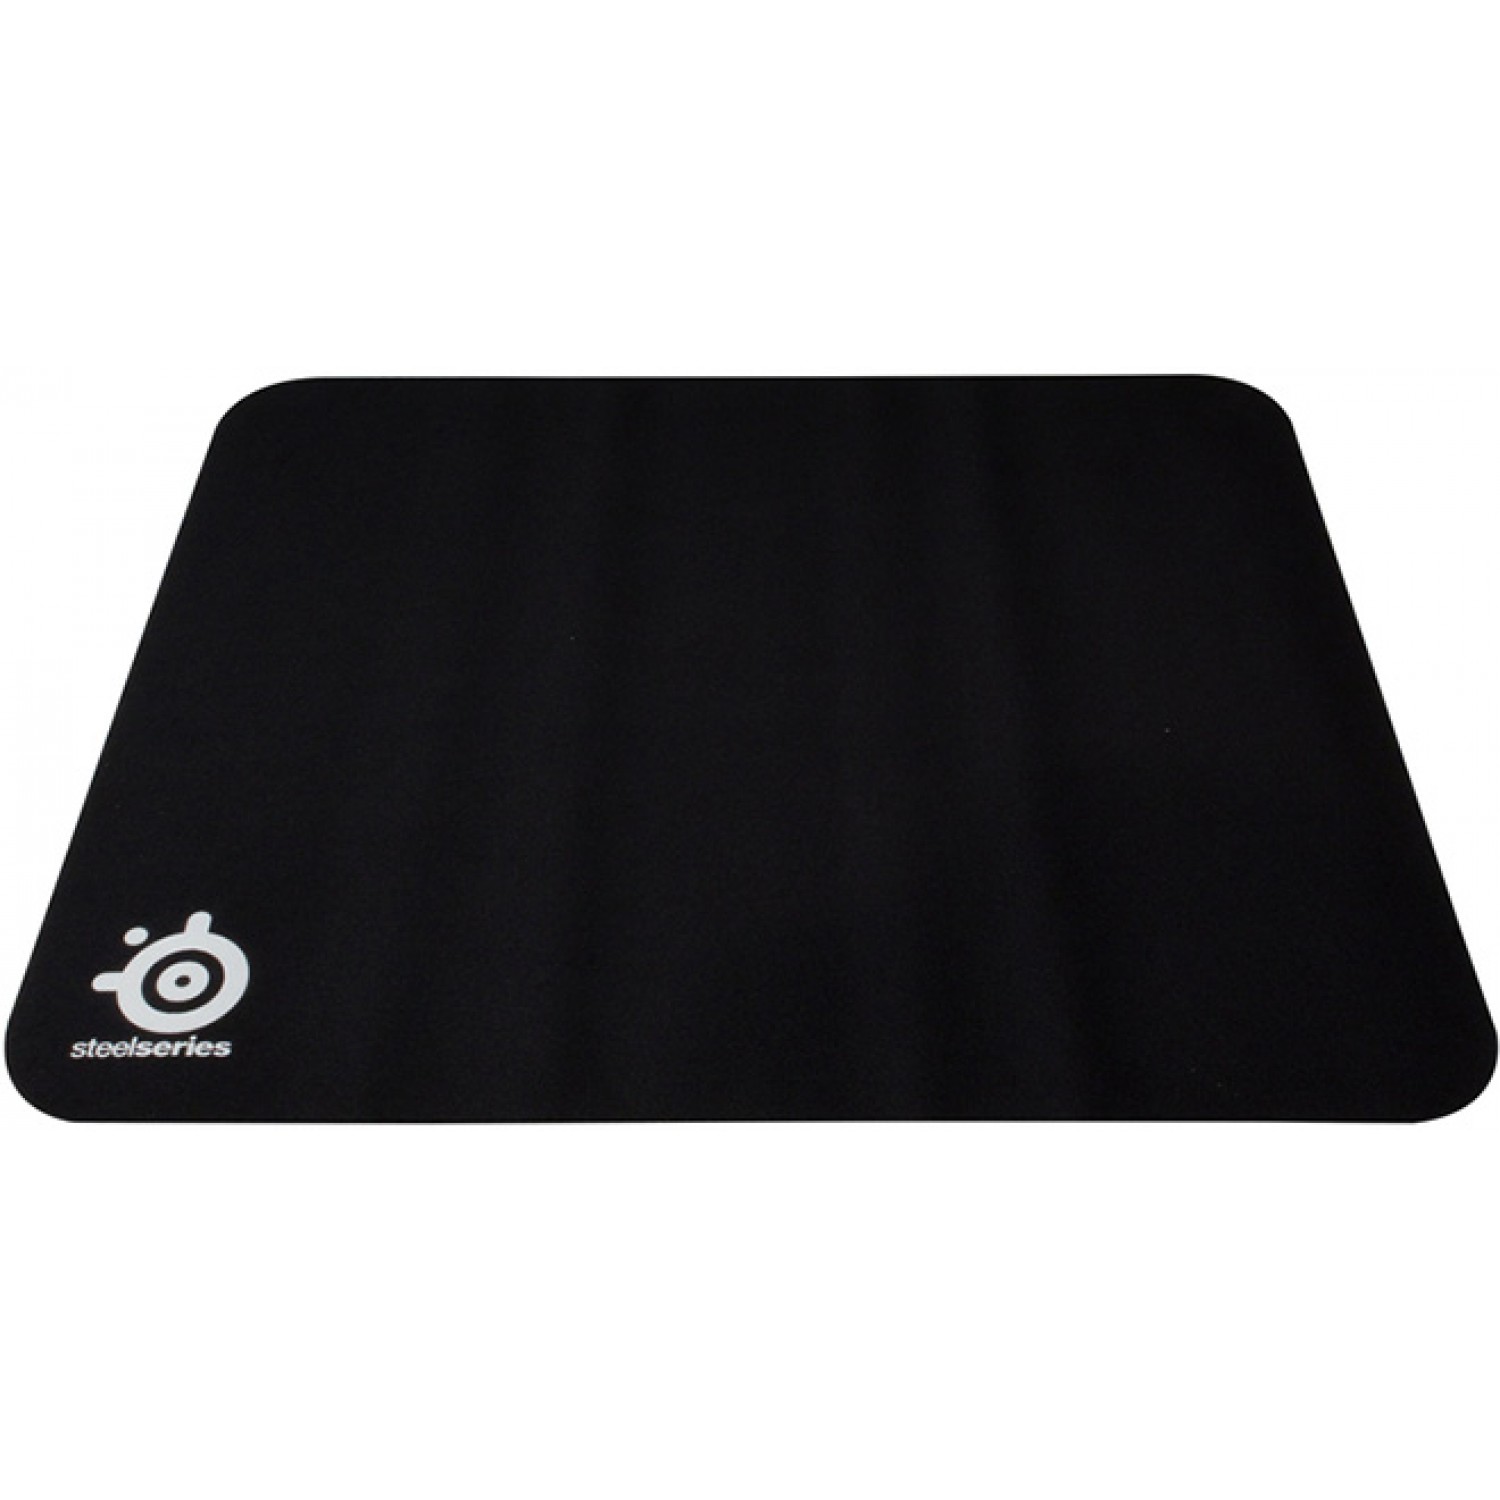 Steelseries Qck Heavy Mouse pad-2